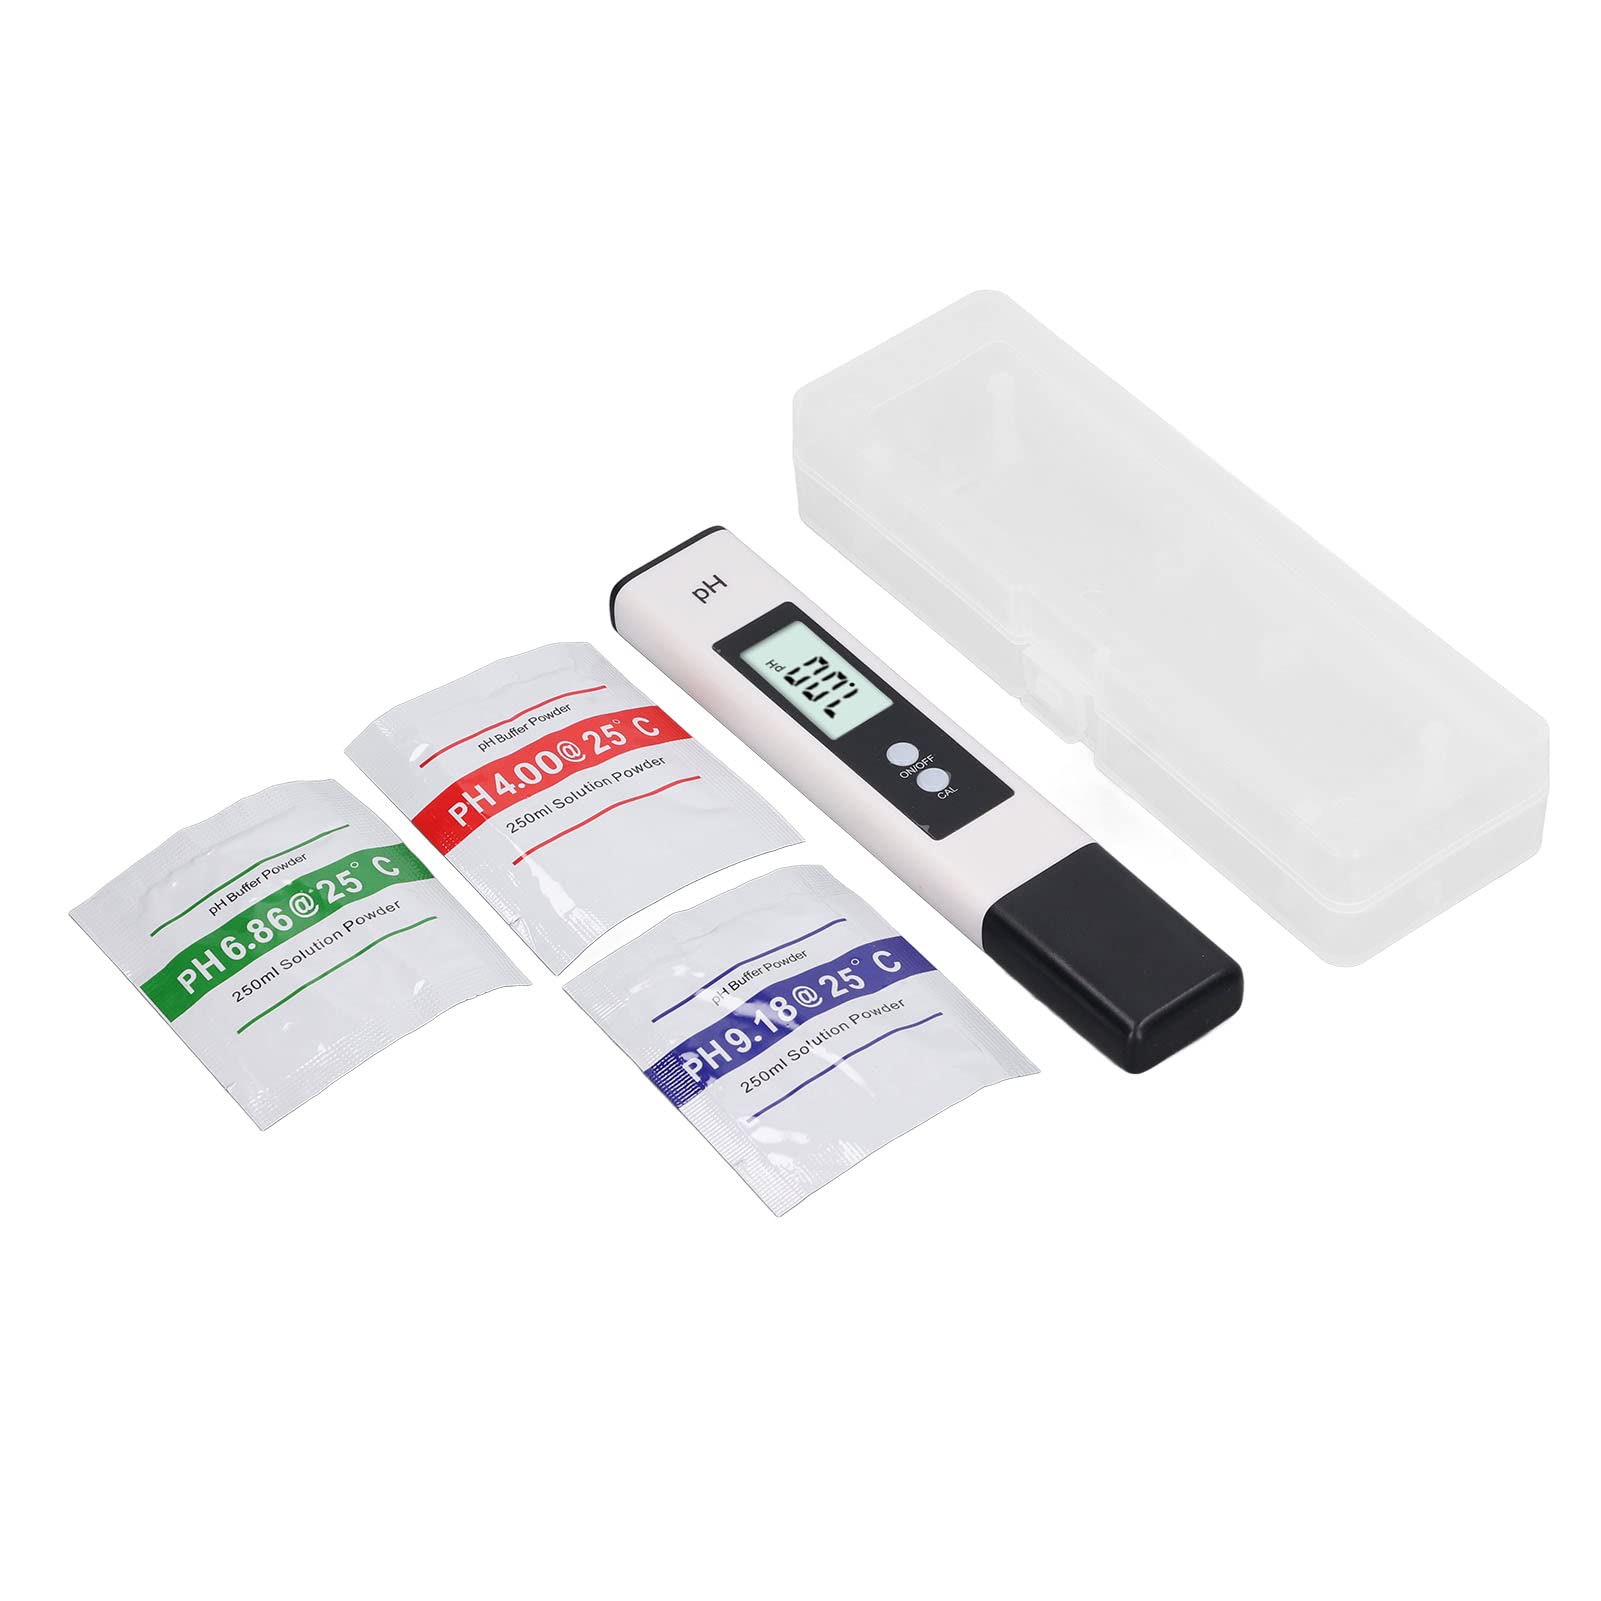 PH Tester, Quick Speed Automatic Recognition PH Detector White Backlit Display Resistance Precise Alloy Probe for Aquaculture